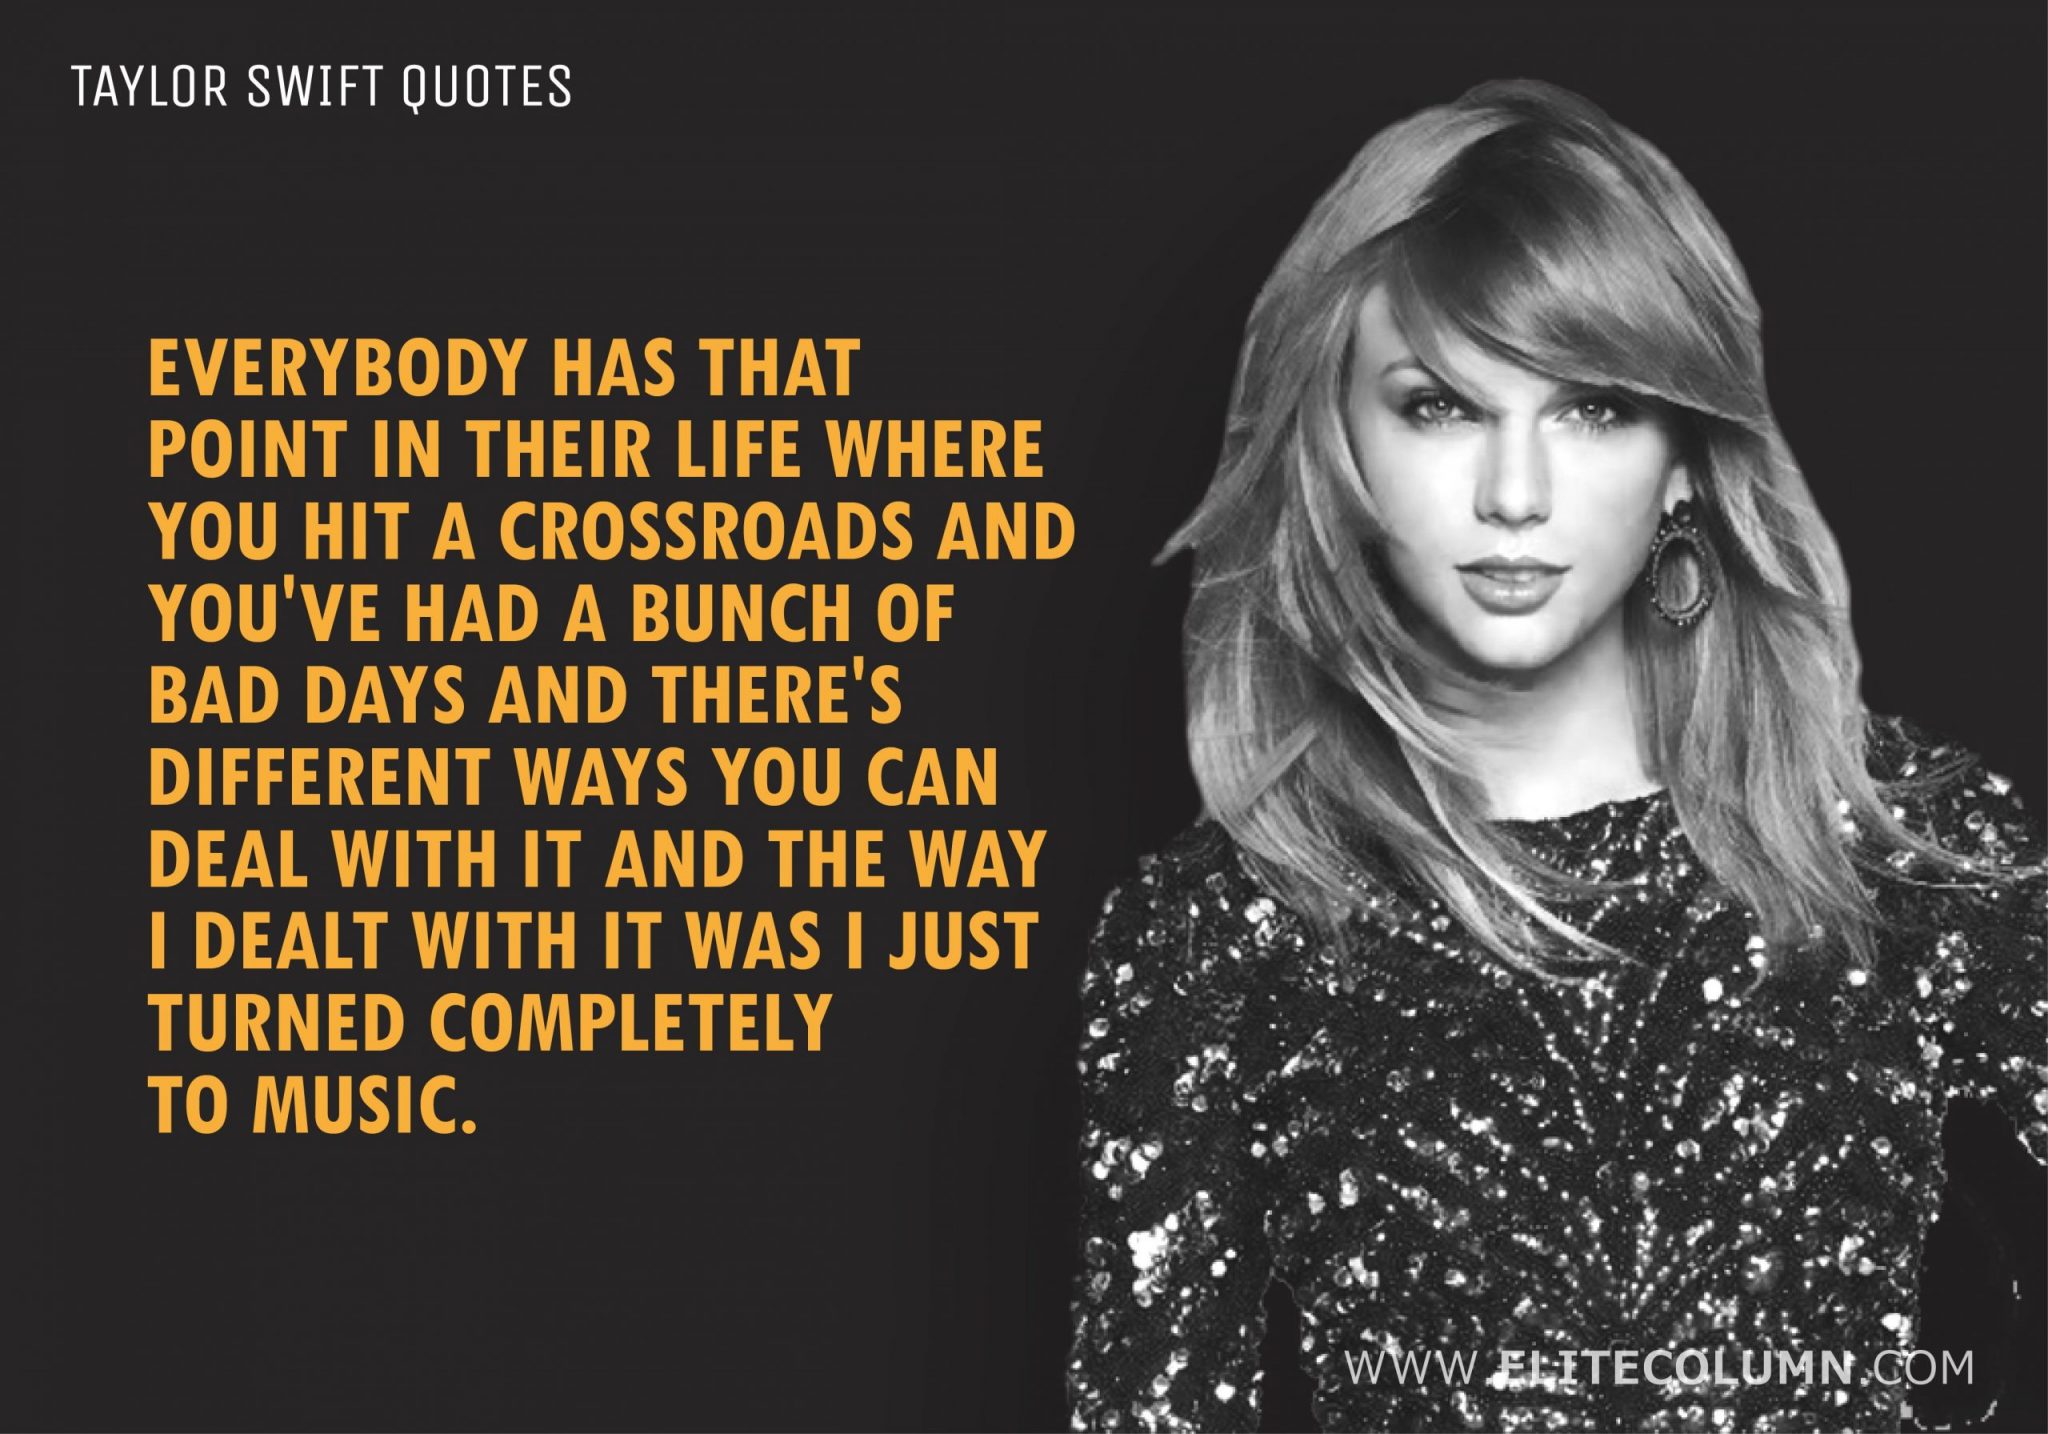 Taylor Swift Quotes (10)